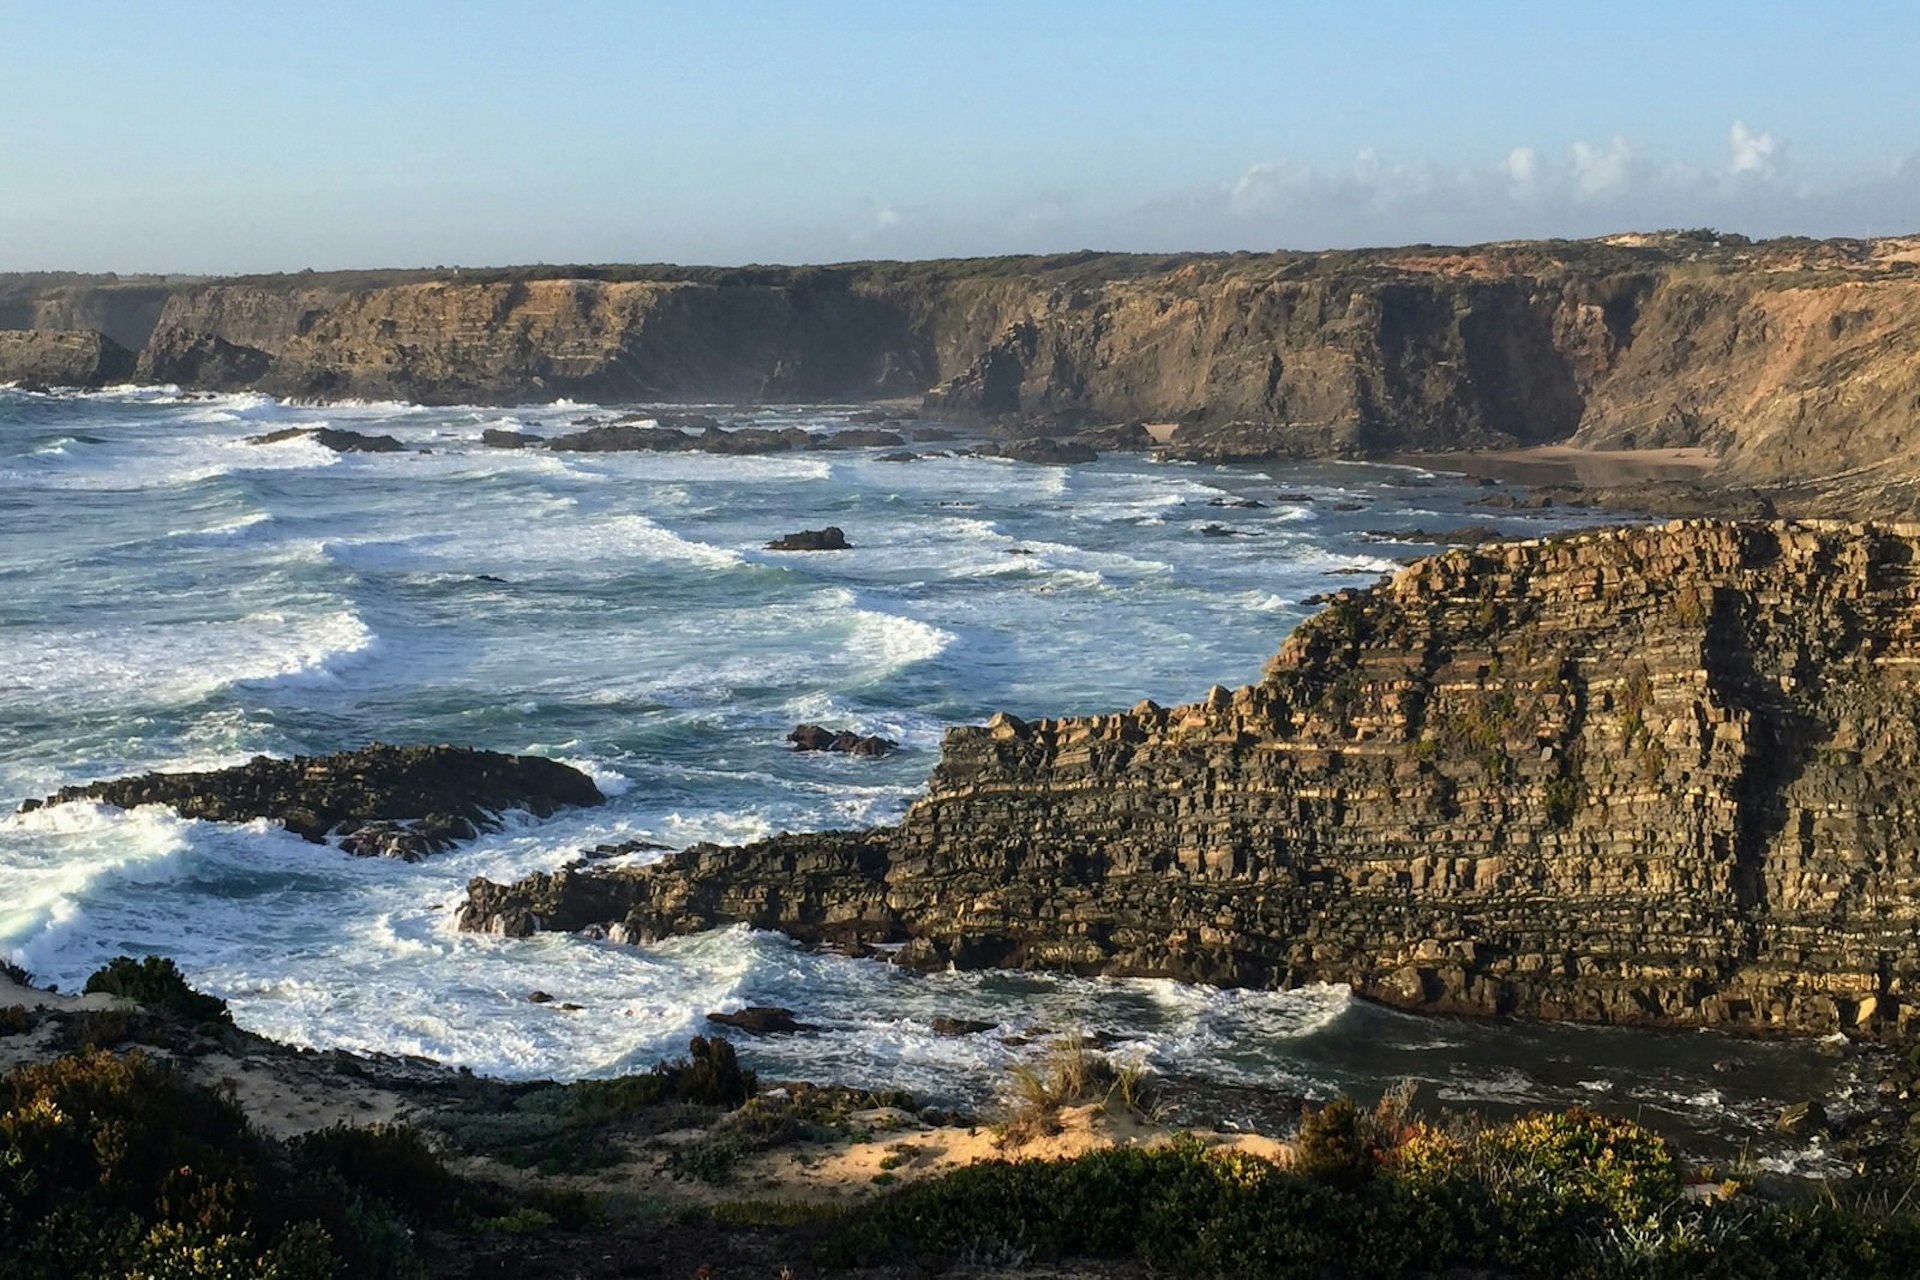 The Alentejo's knockout coastline means this region is rich in seafood © Regis St. Louis / Lonely Planet